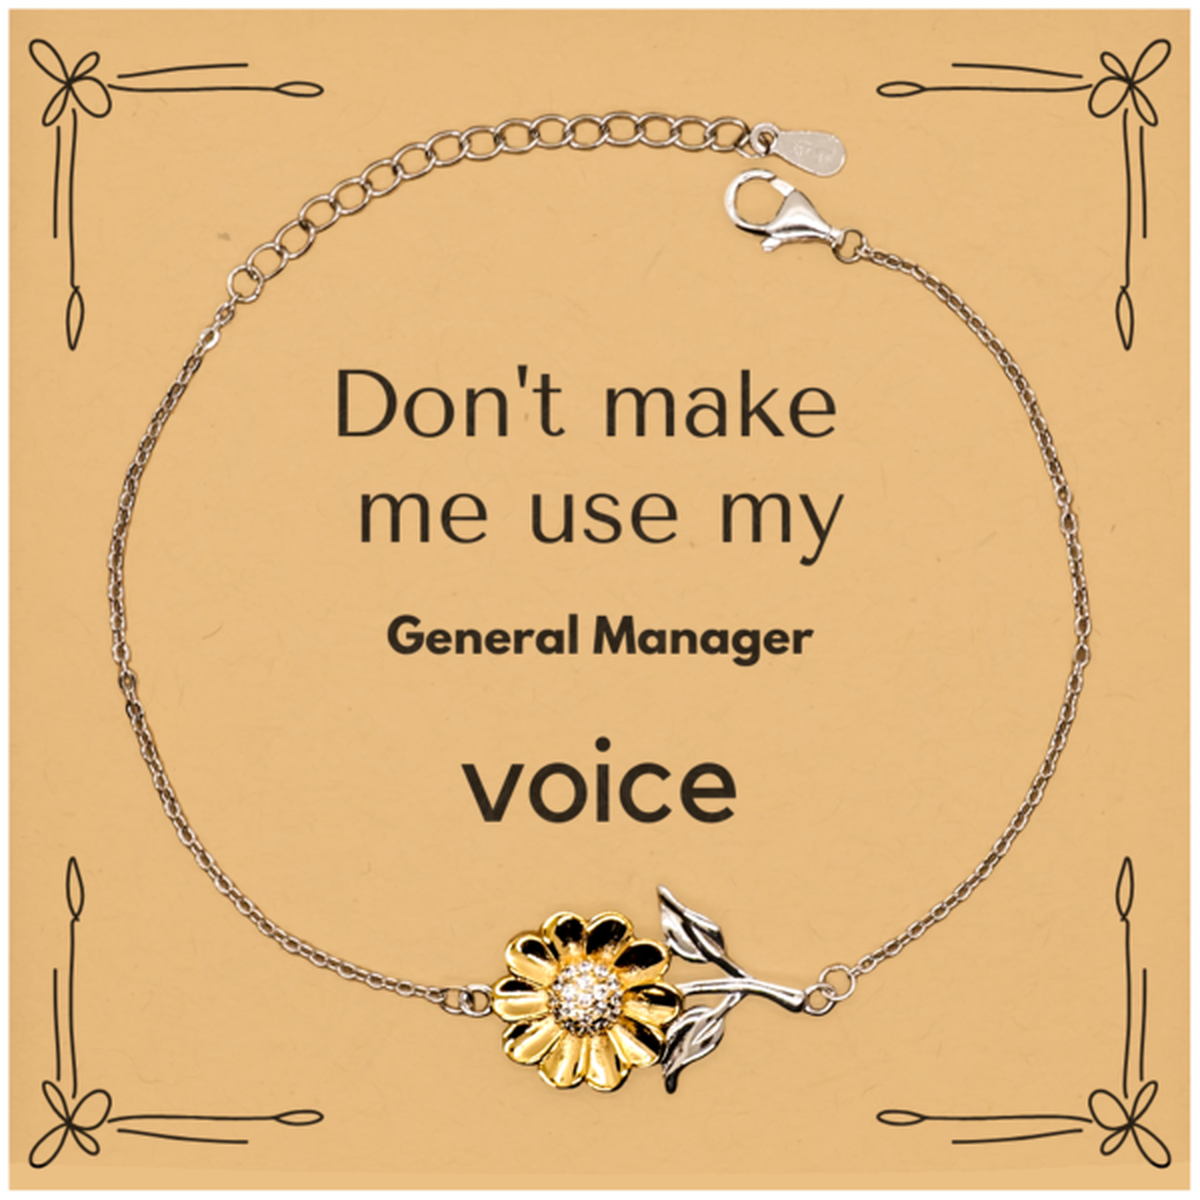 Don't make me use my General Manager voice, Sarcasm General Manager Card Gifts, Christmas General Manager Sunflower Bracelet Birthday Unique Gifts For General Manager Coworkers, Men, Women, Colleague, Friends